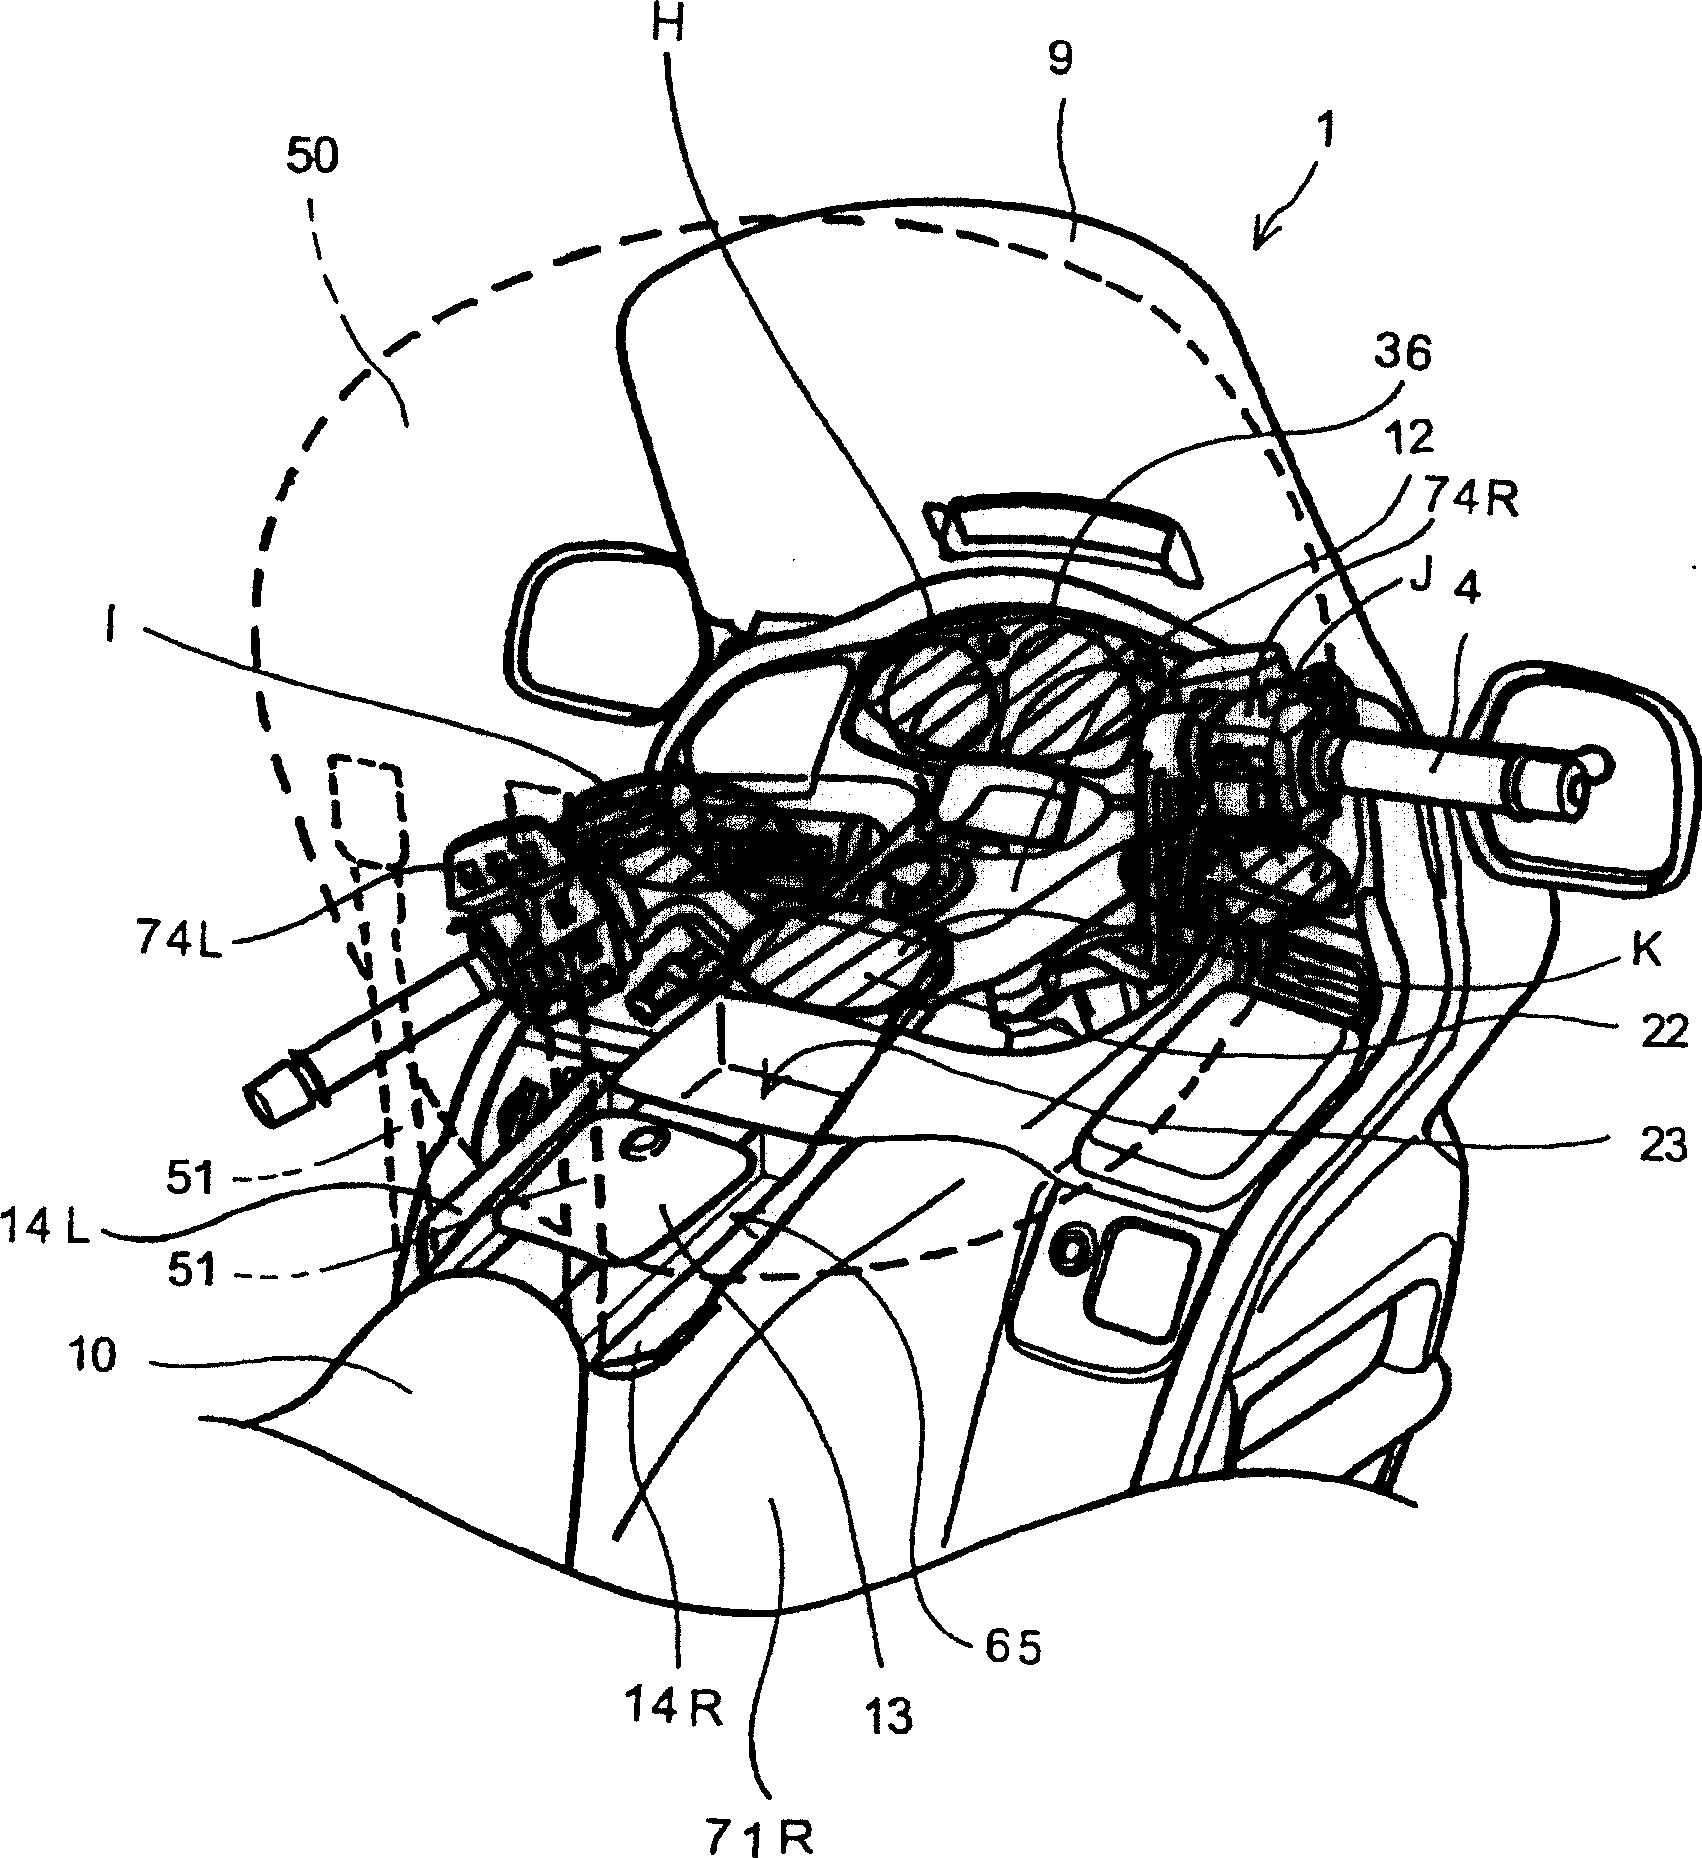 Air bag module cover structure